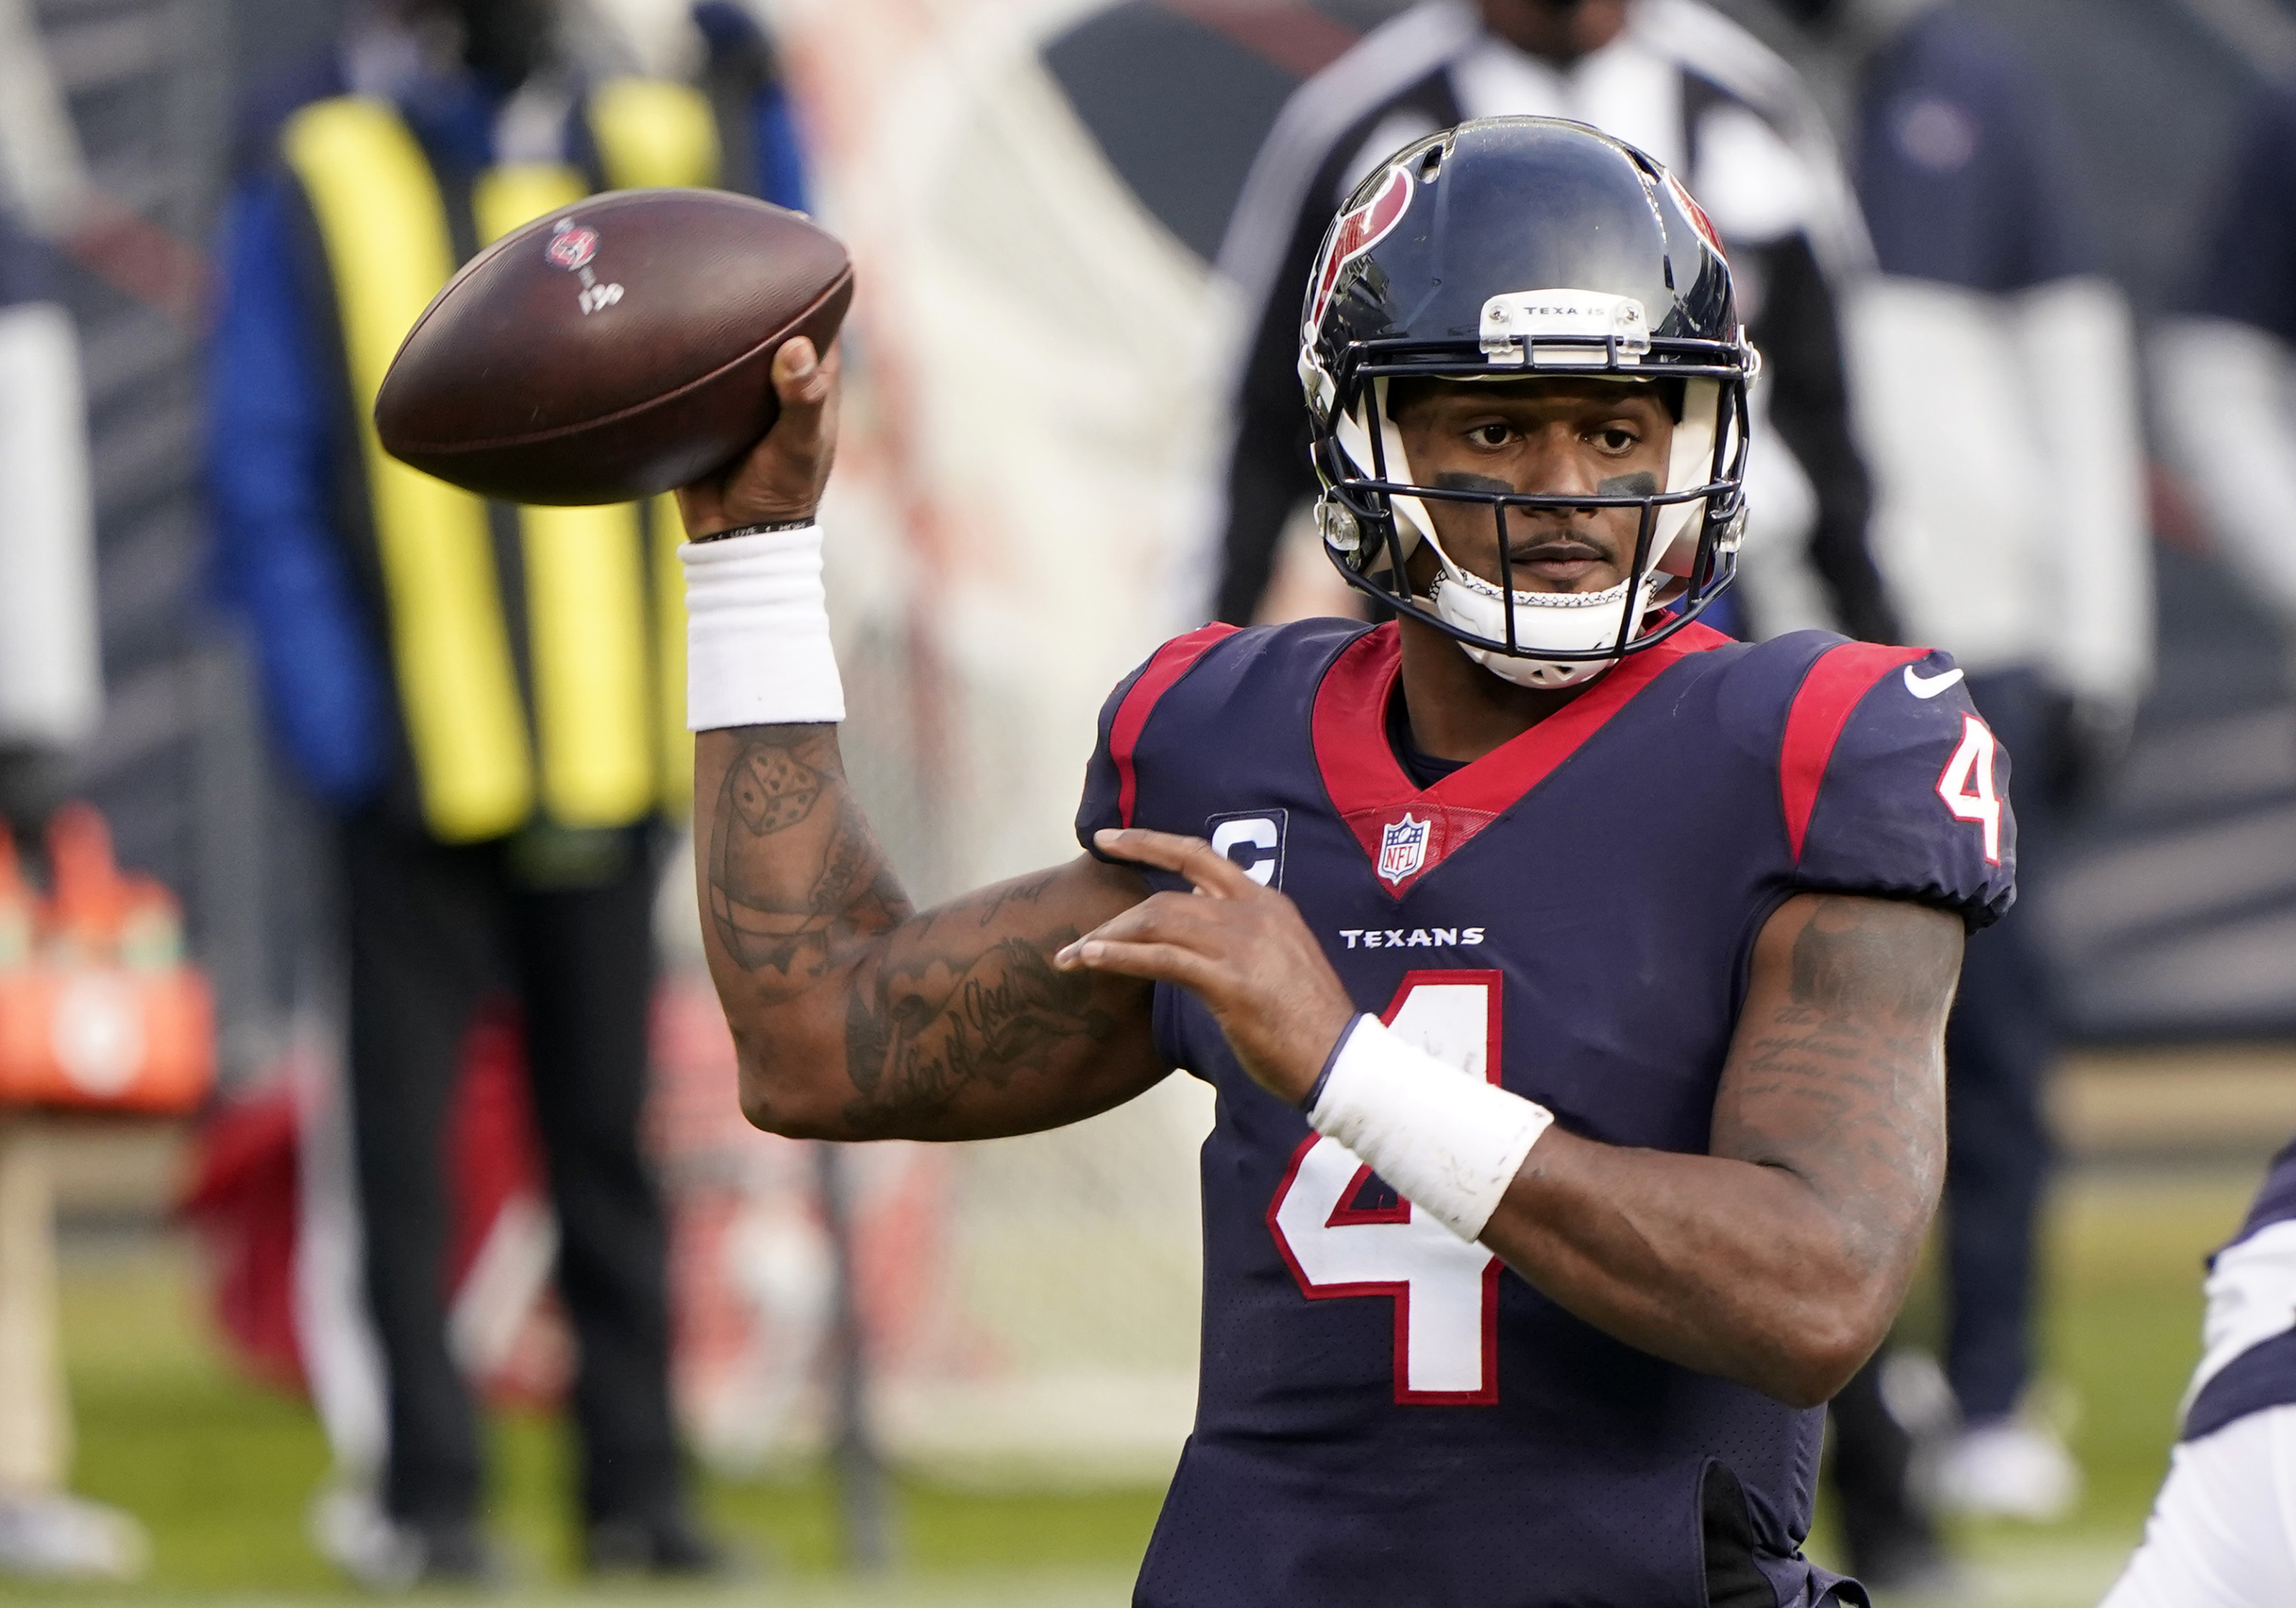 No, the Philadelphia Eagles should not try to trade for Deshaun Watson